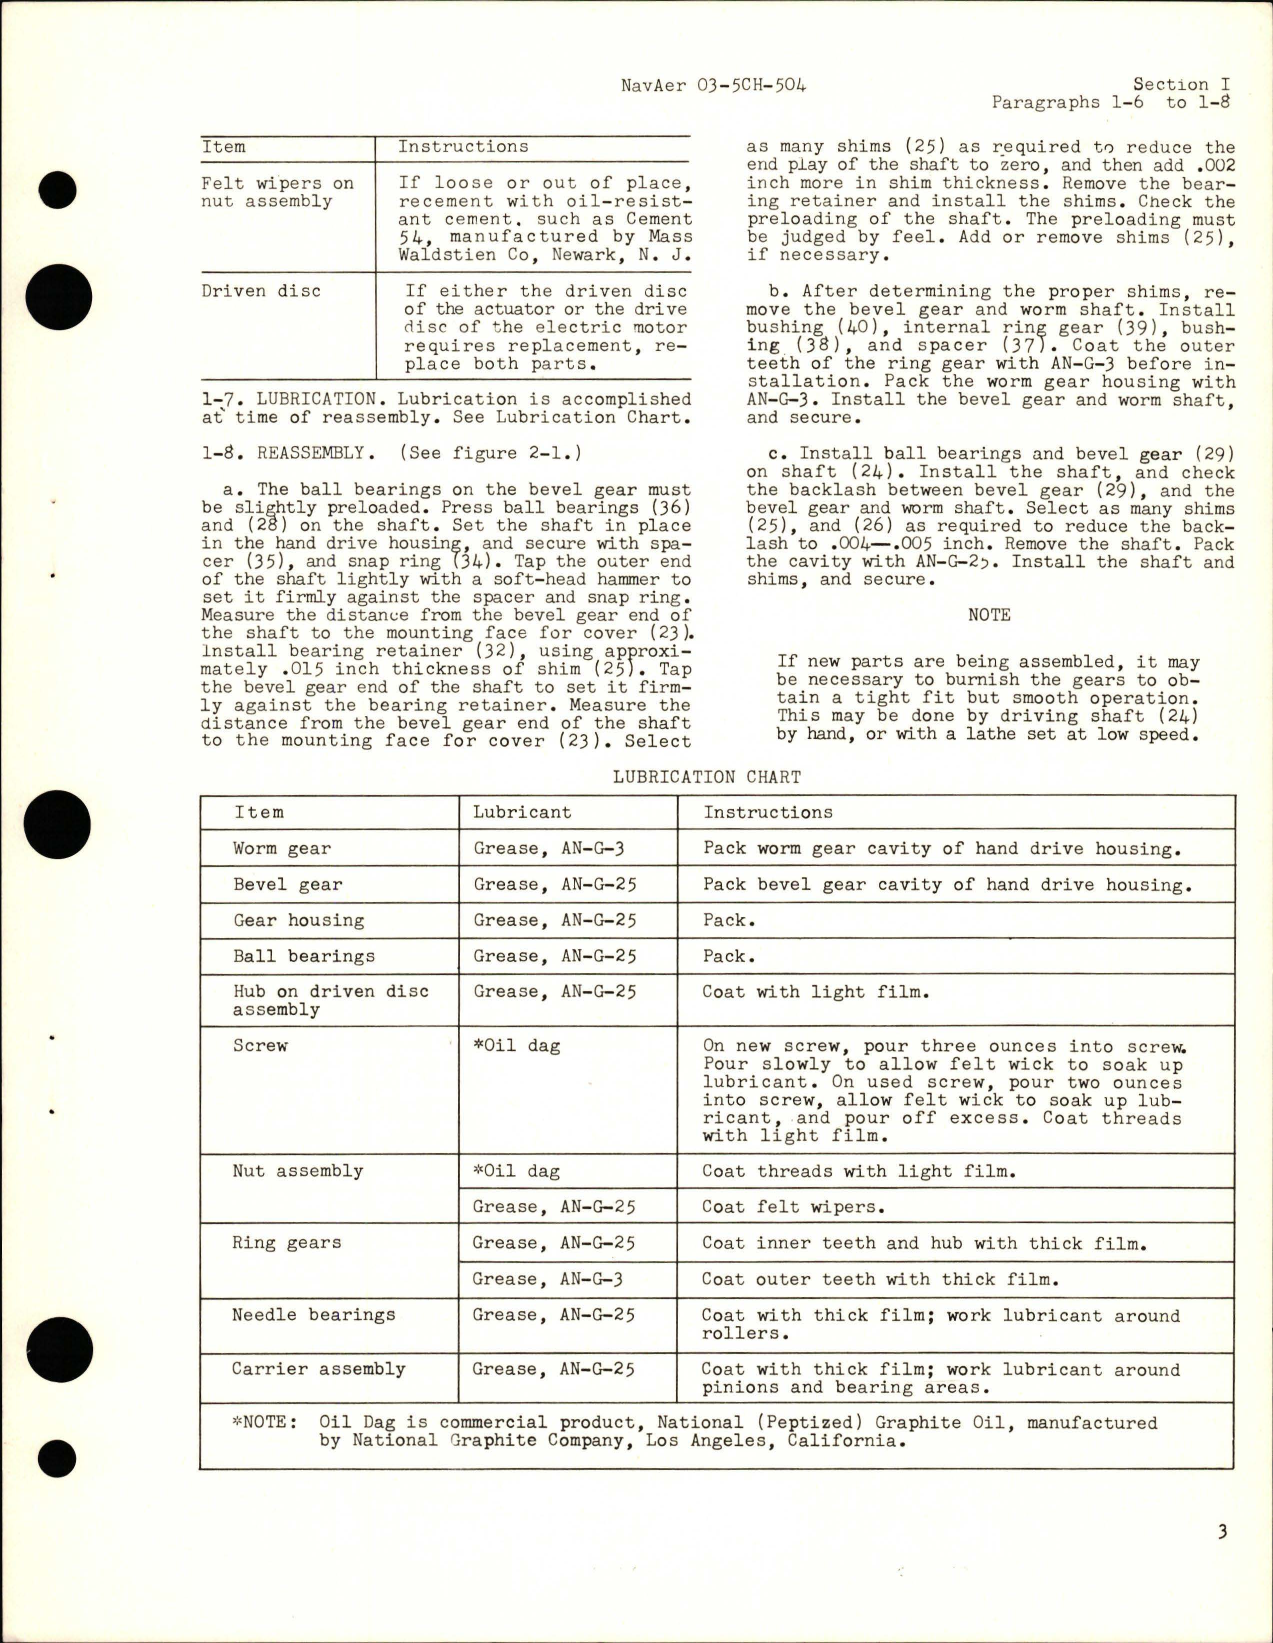 Sample page 5 from AirCorps Library document: Overhaul Instructions with Parts Catalog for Actuator Horizontal Stabilizer - Part R117